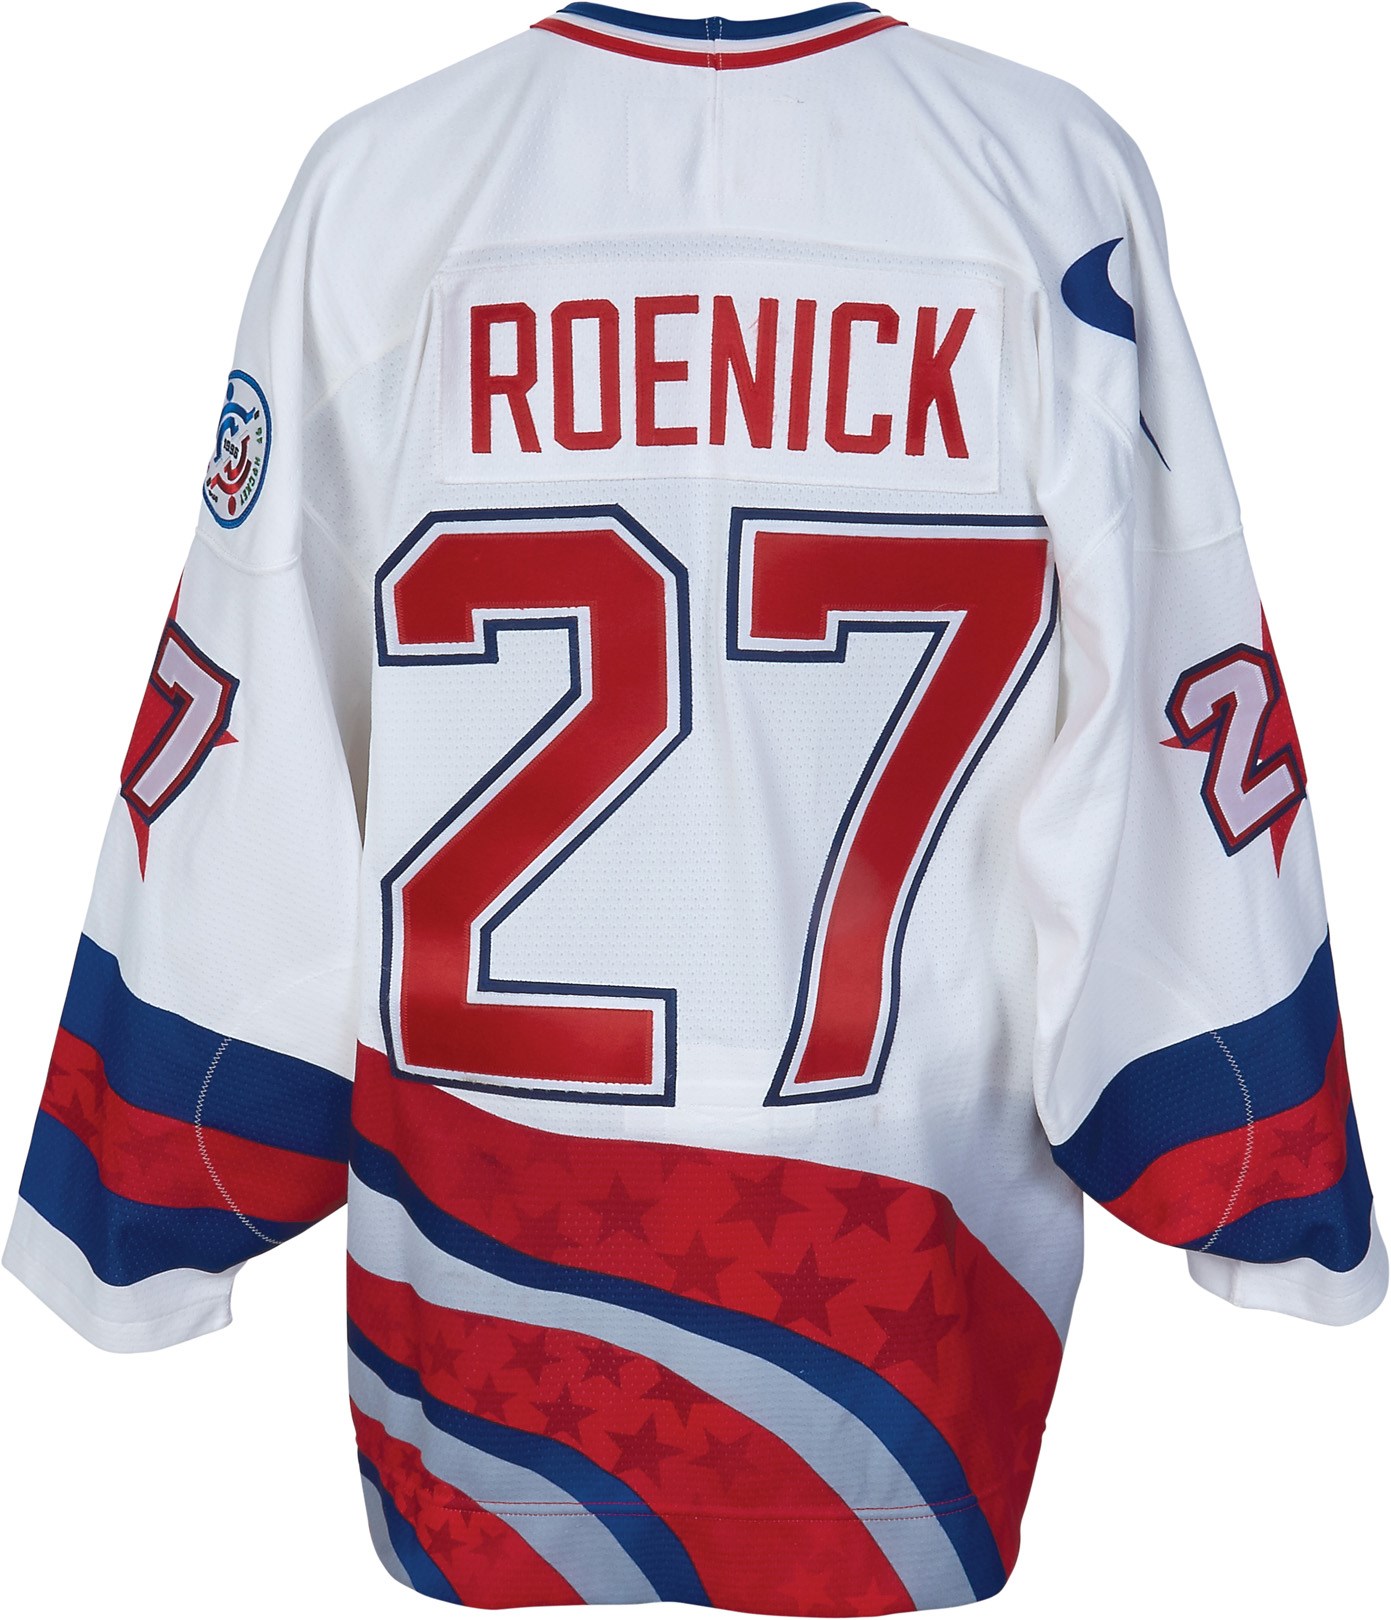 - 1996 Jeremy Roenick World Cup of Hockey Game Worn Jersey